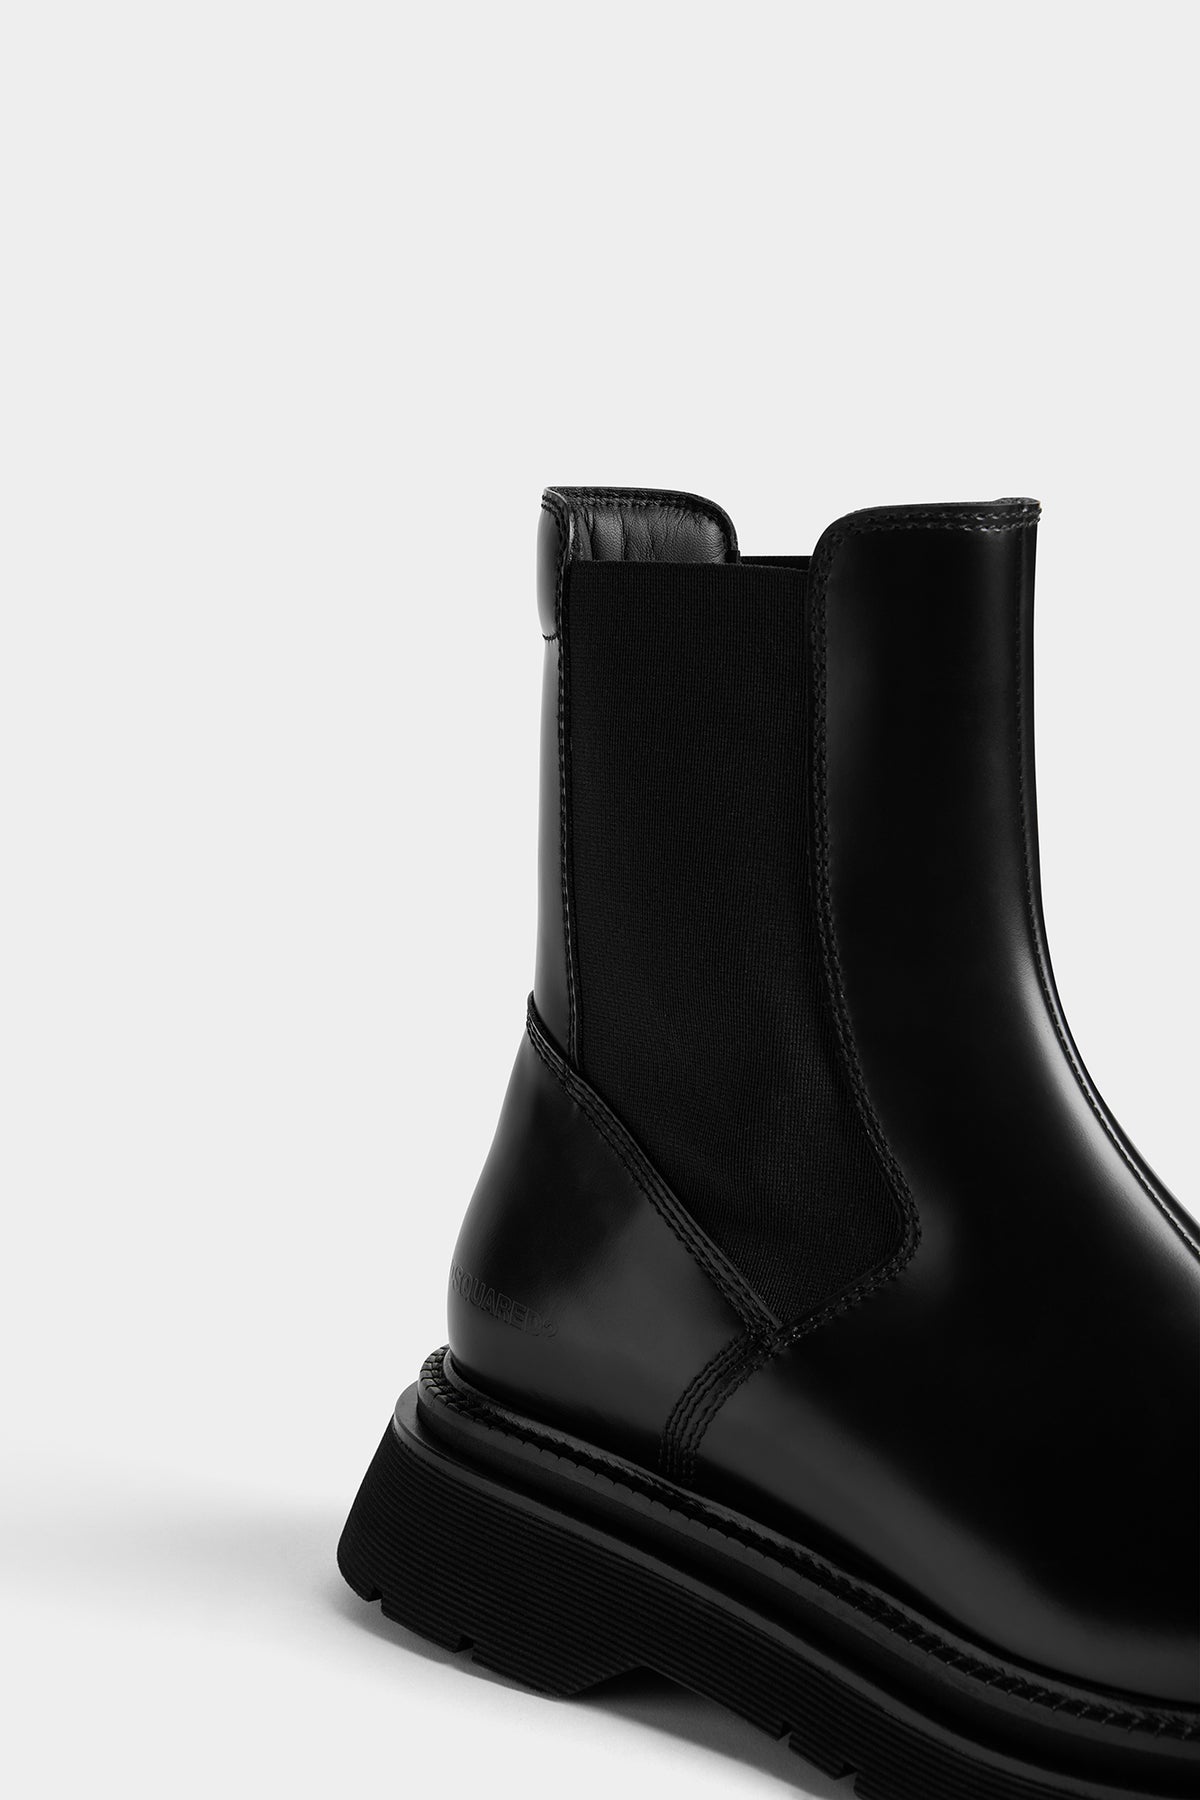 Urban Chelsea Ankle Boots